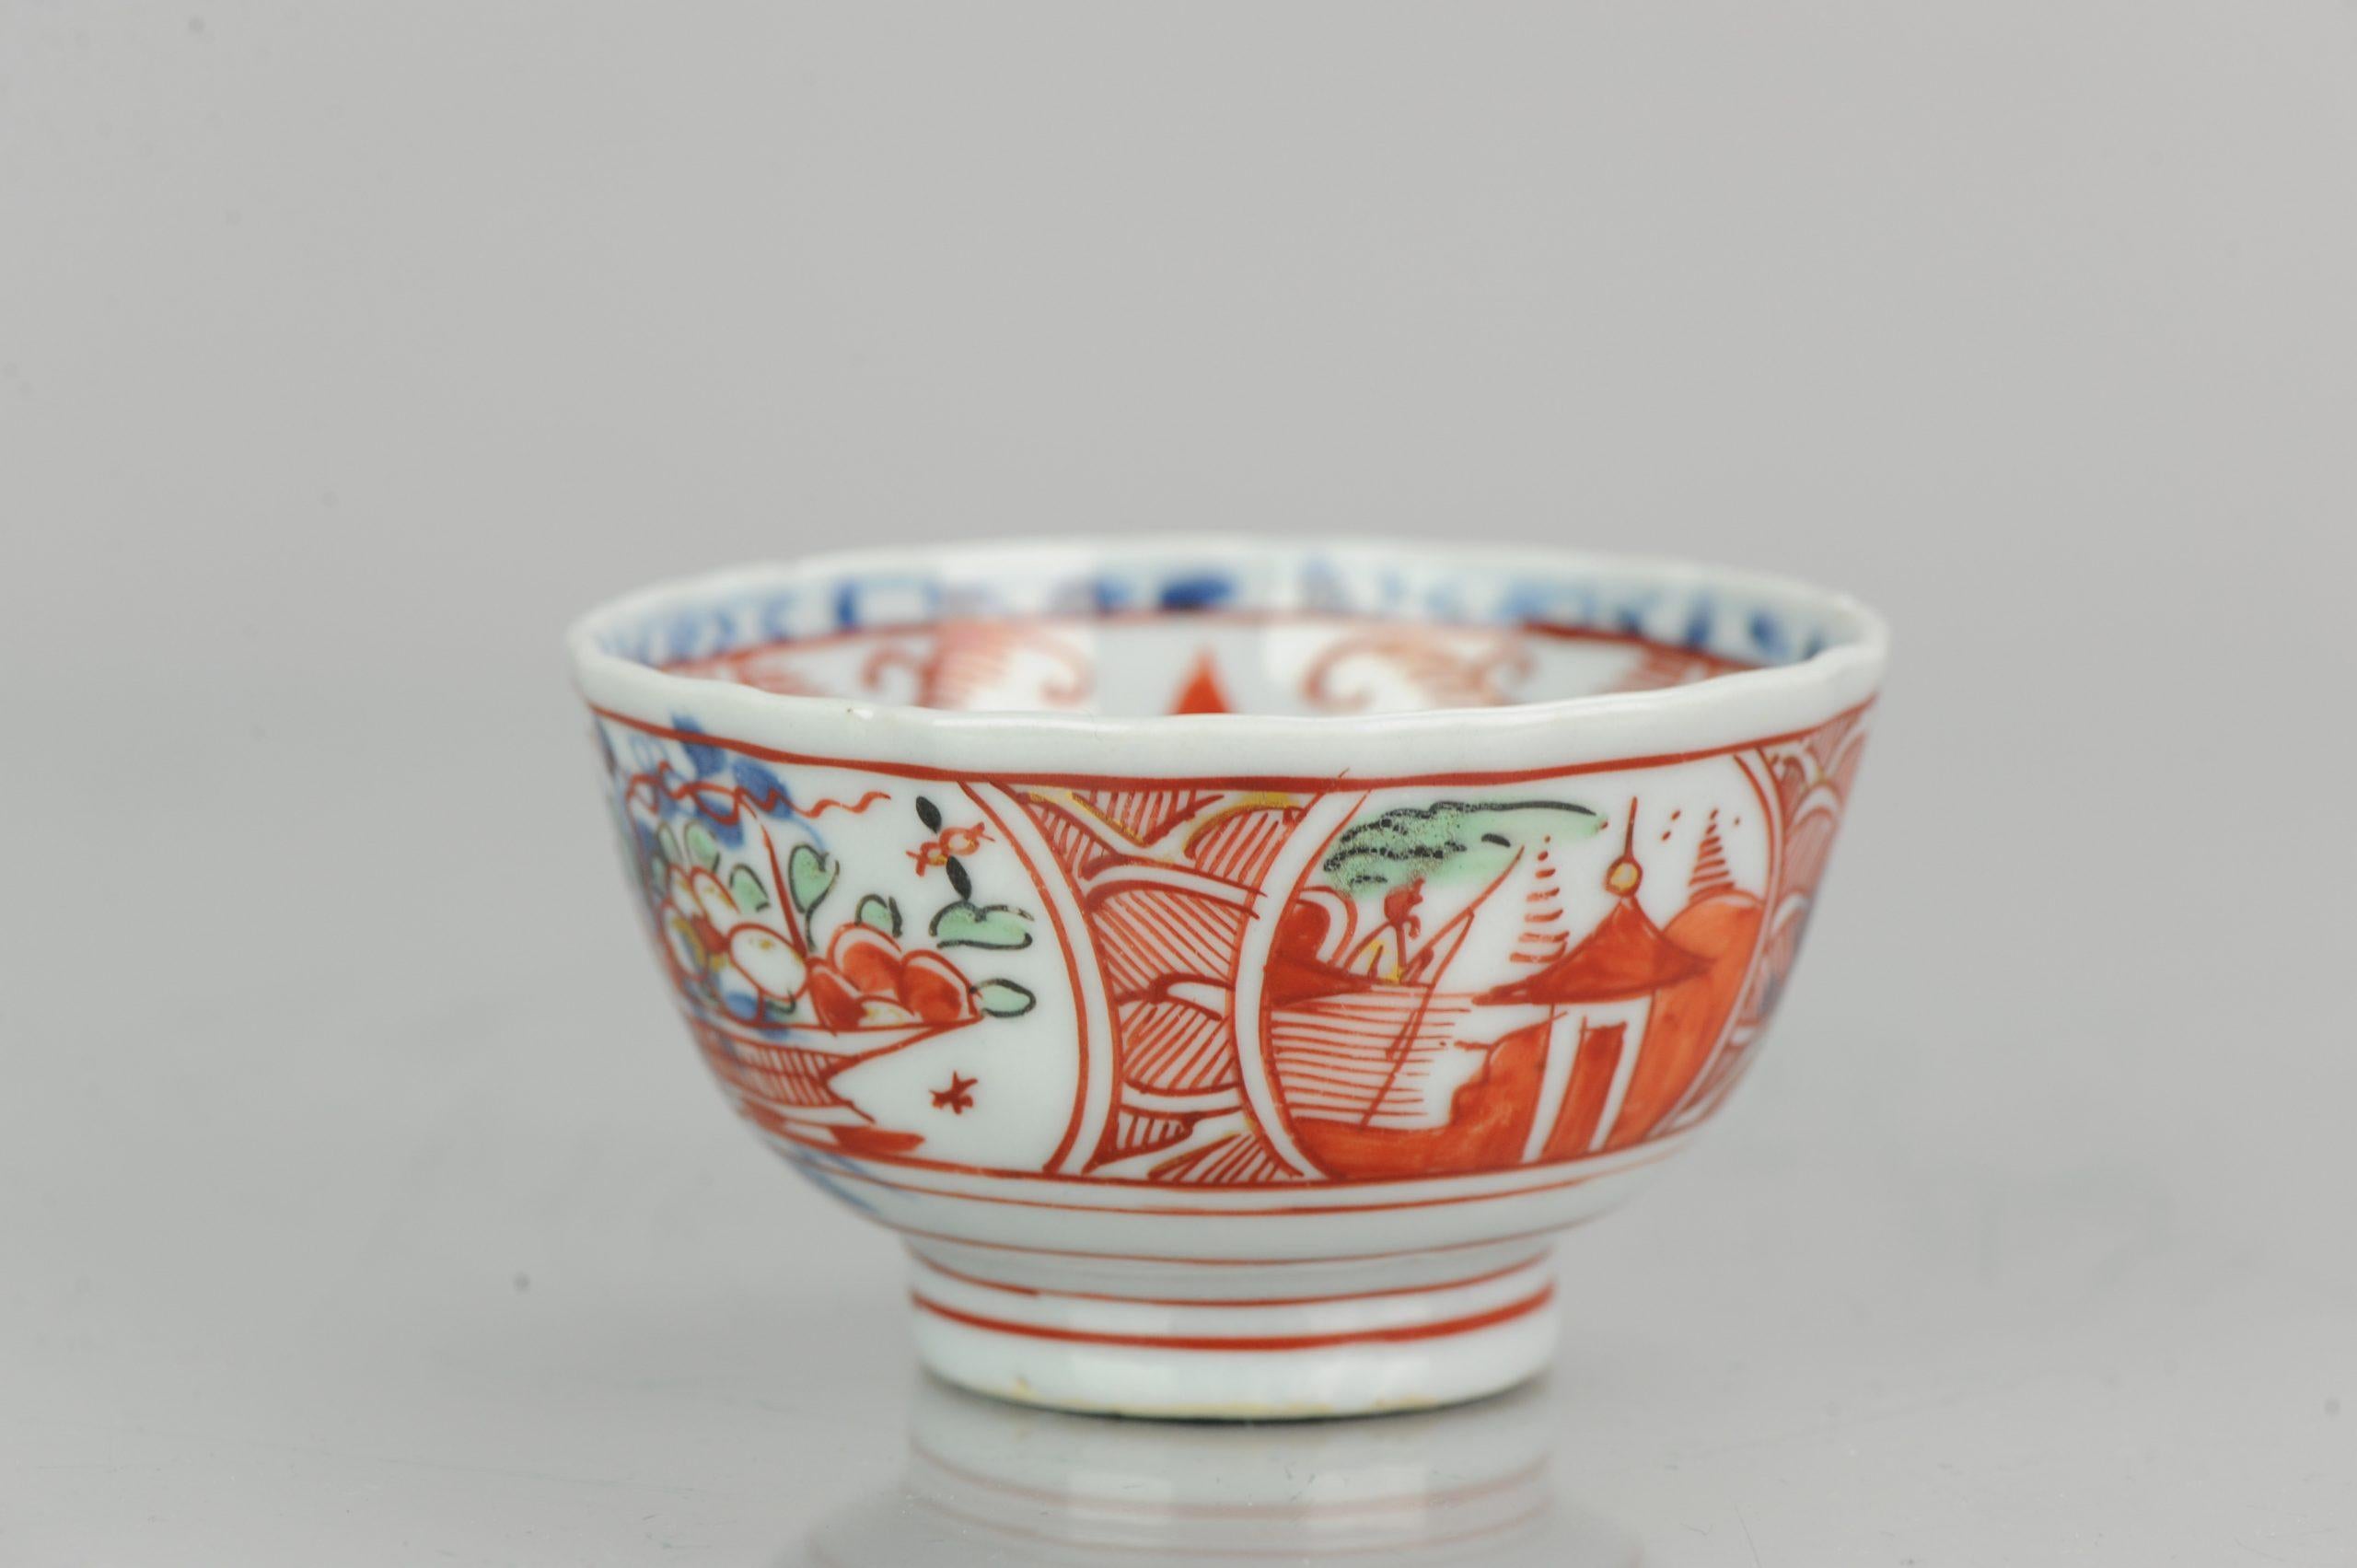 A very nicely decorated bowl. Dating to around 1740.

Additional information:
Material: Porcelain & Pottery
Type: Plates, Tea Drinking
Region of Origin: China
Period: 18th century Qing (1661 - 1912)
Age: Pre-1800
Condition: Overall Condition 1 frit